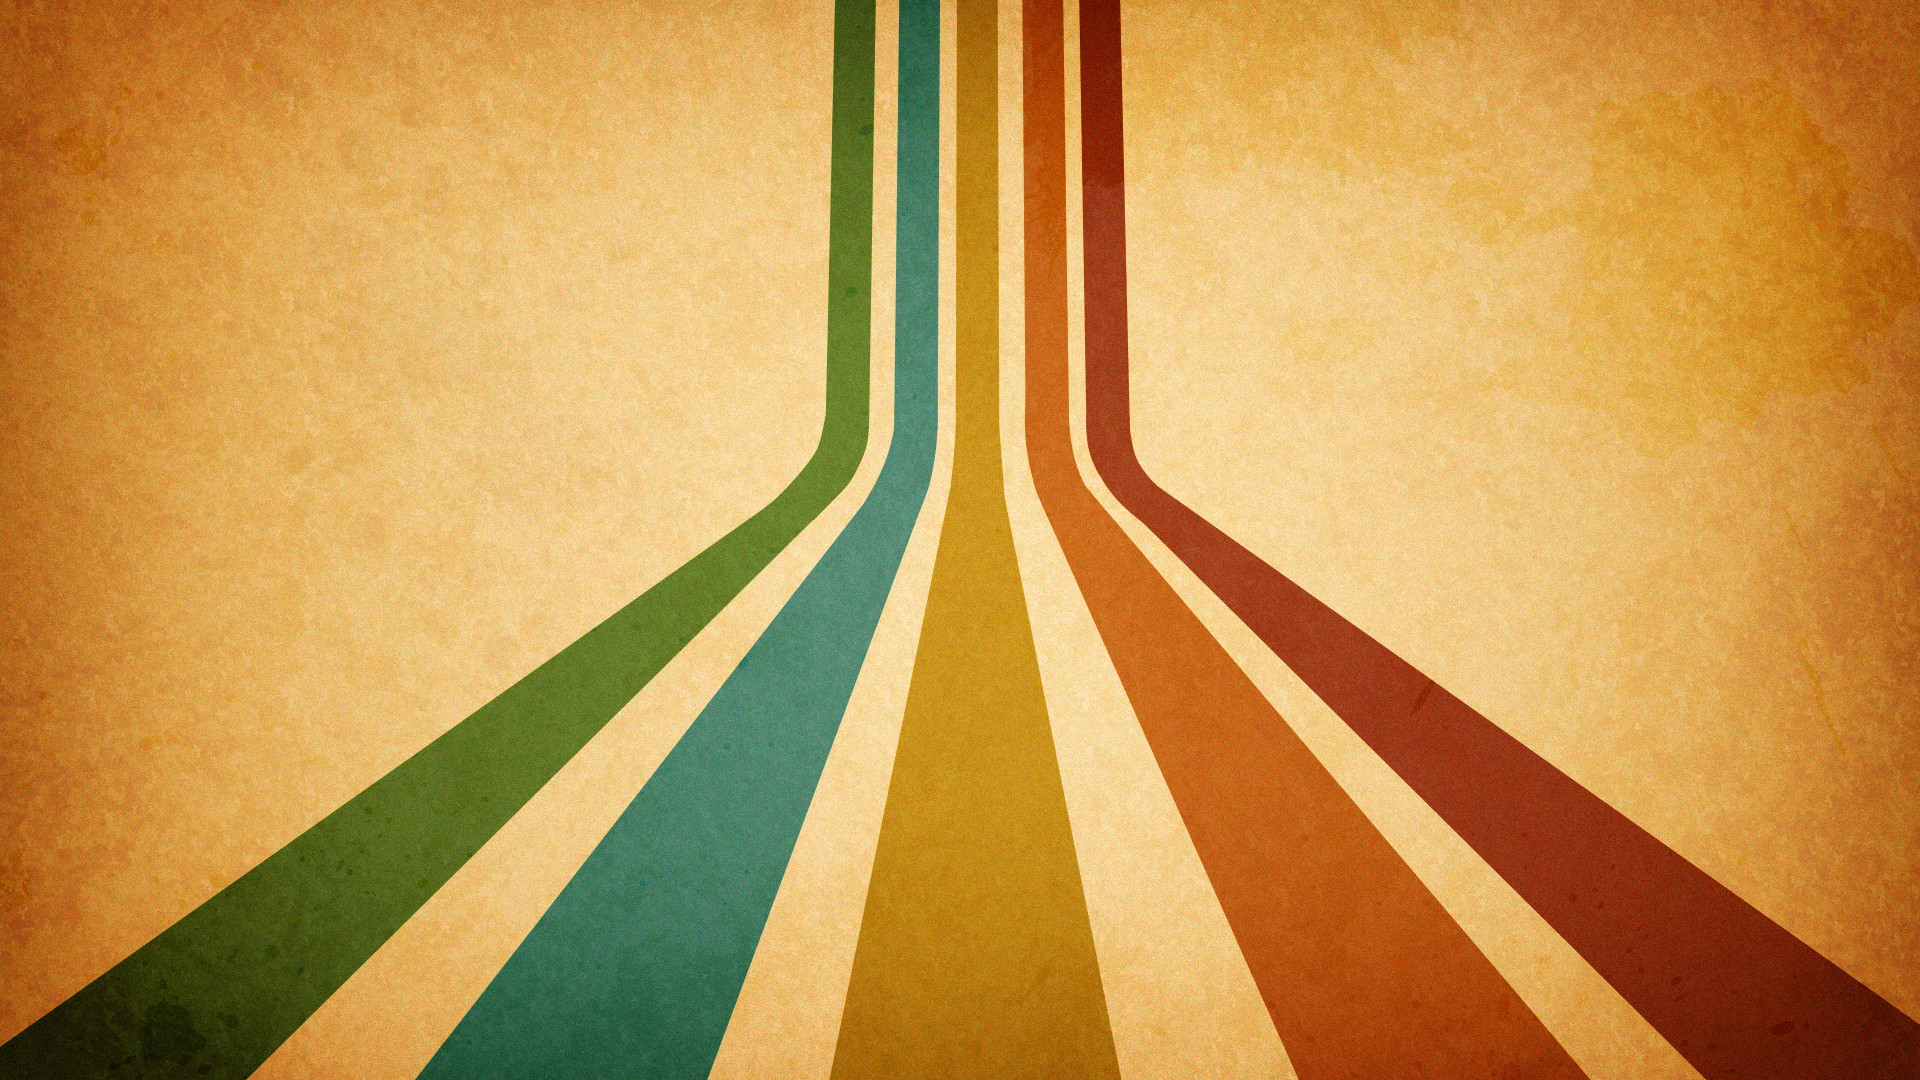 Wallpaper The We Are Using At Lifehacker